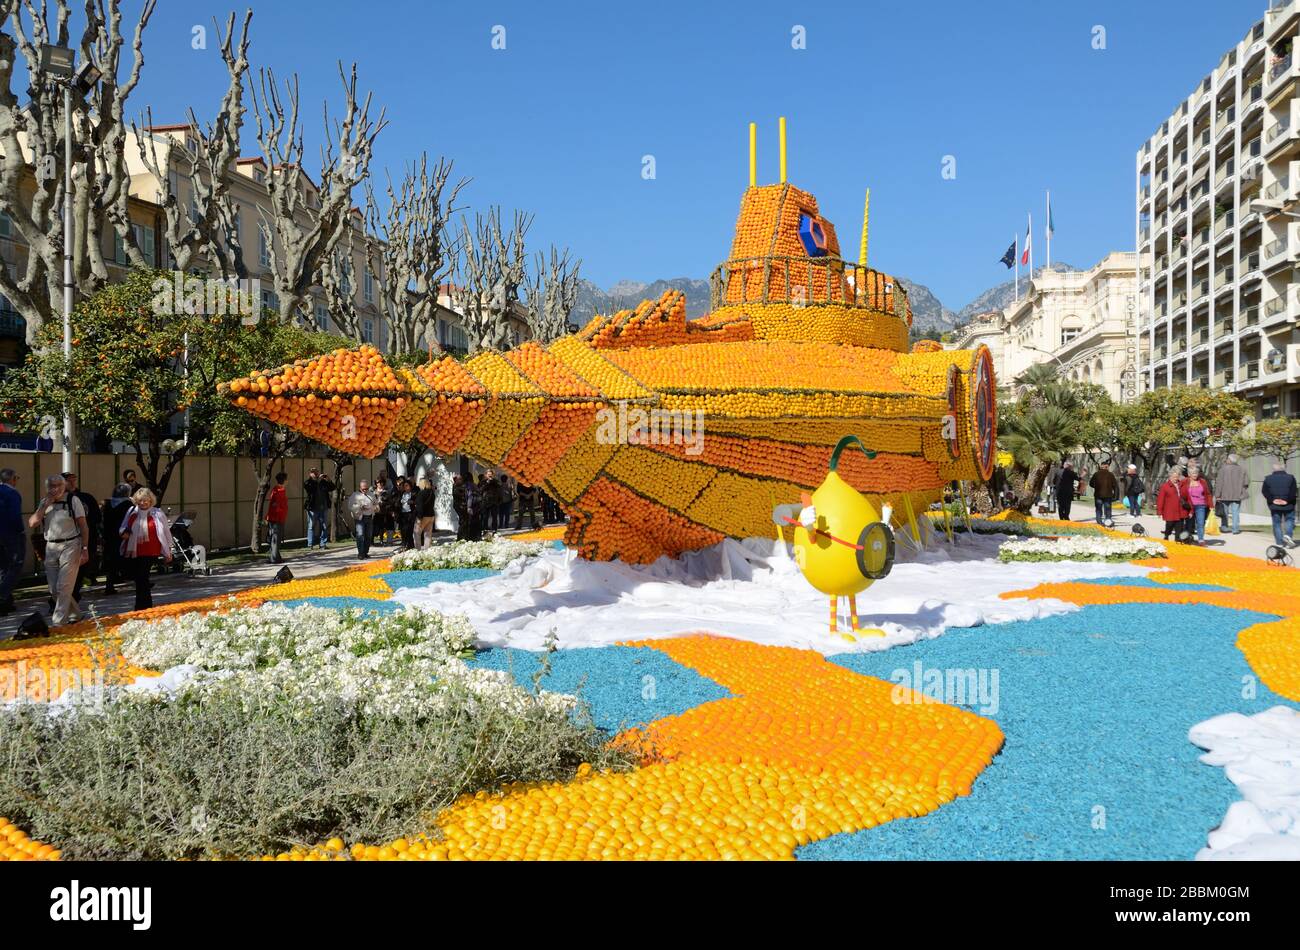 Tourists or Visitors & Submarine made of Oranges or Oranges Sculpture at the Annual Lermon Festival Menton Côte-d'Azur France Stock Photo